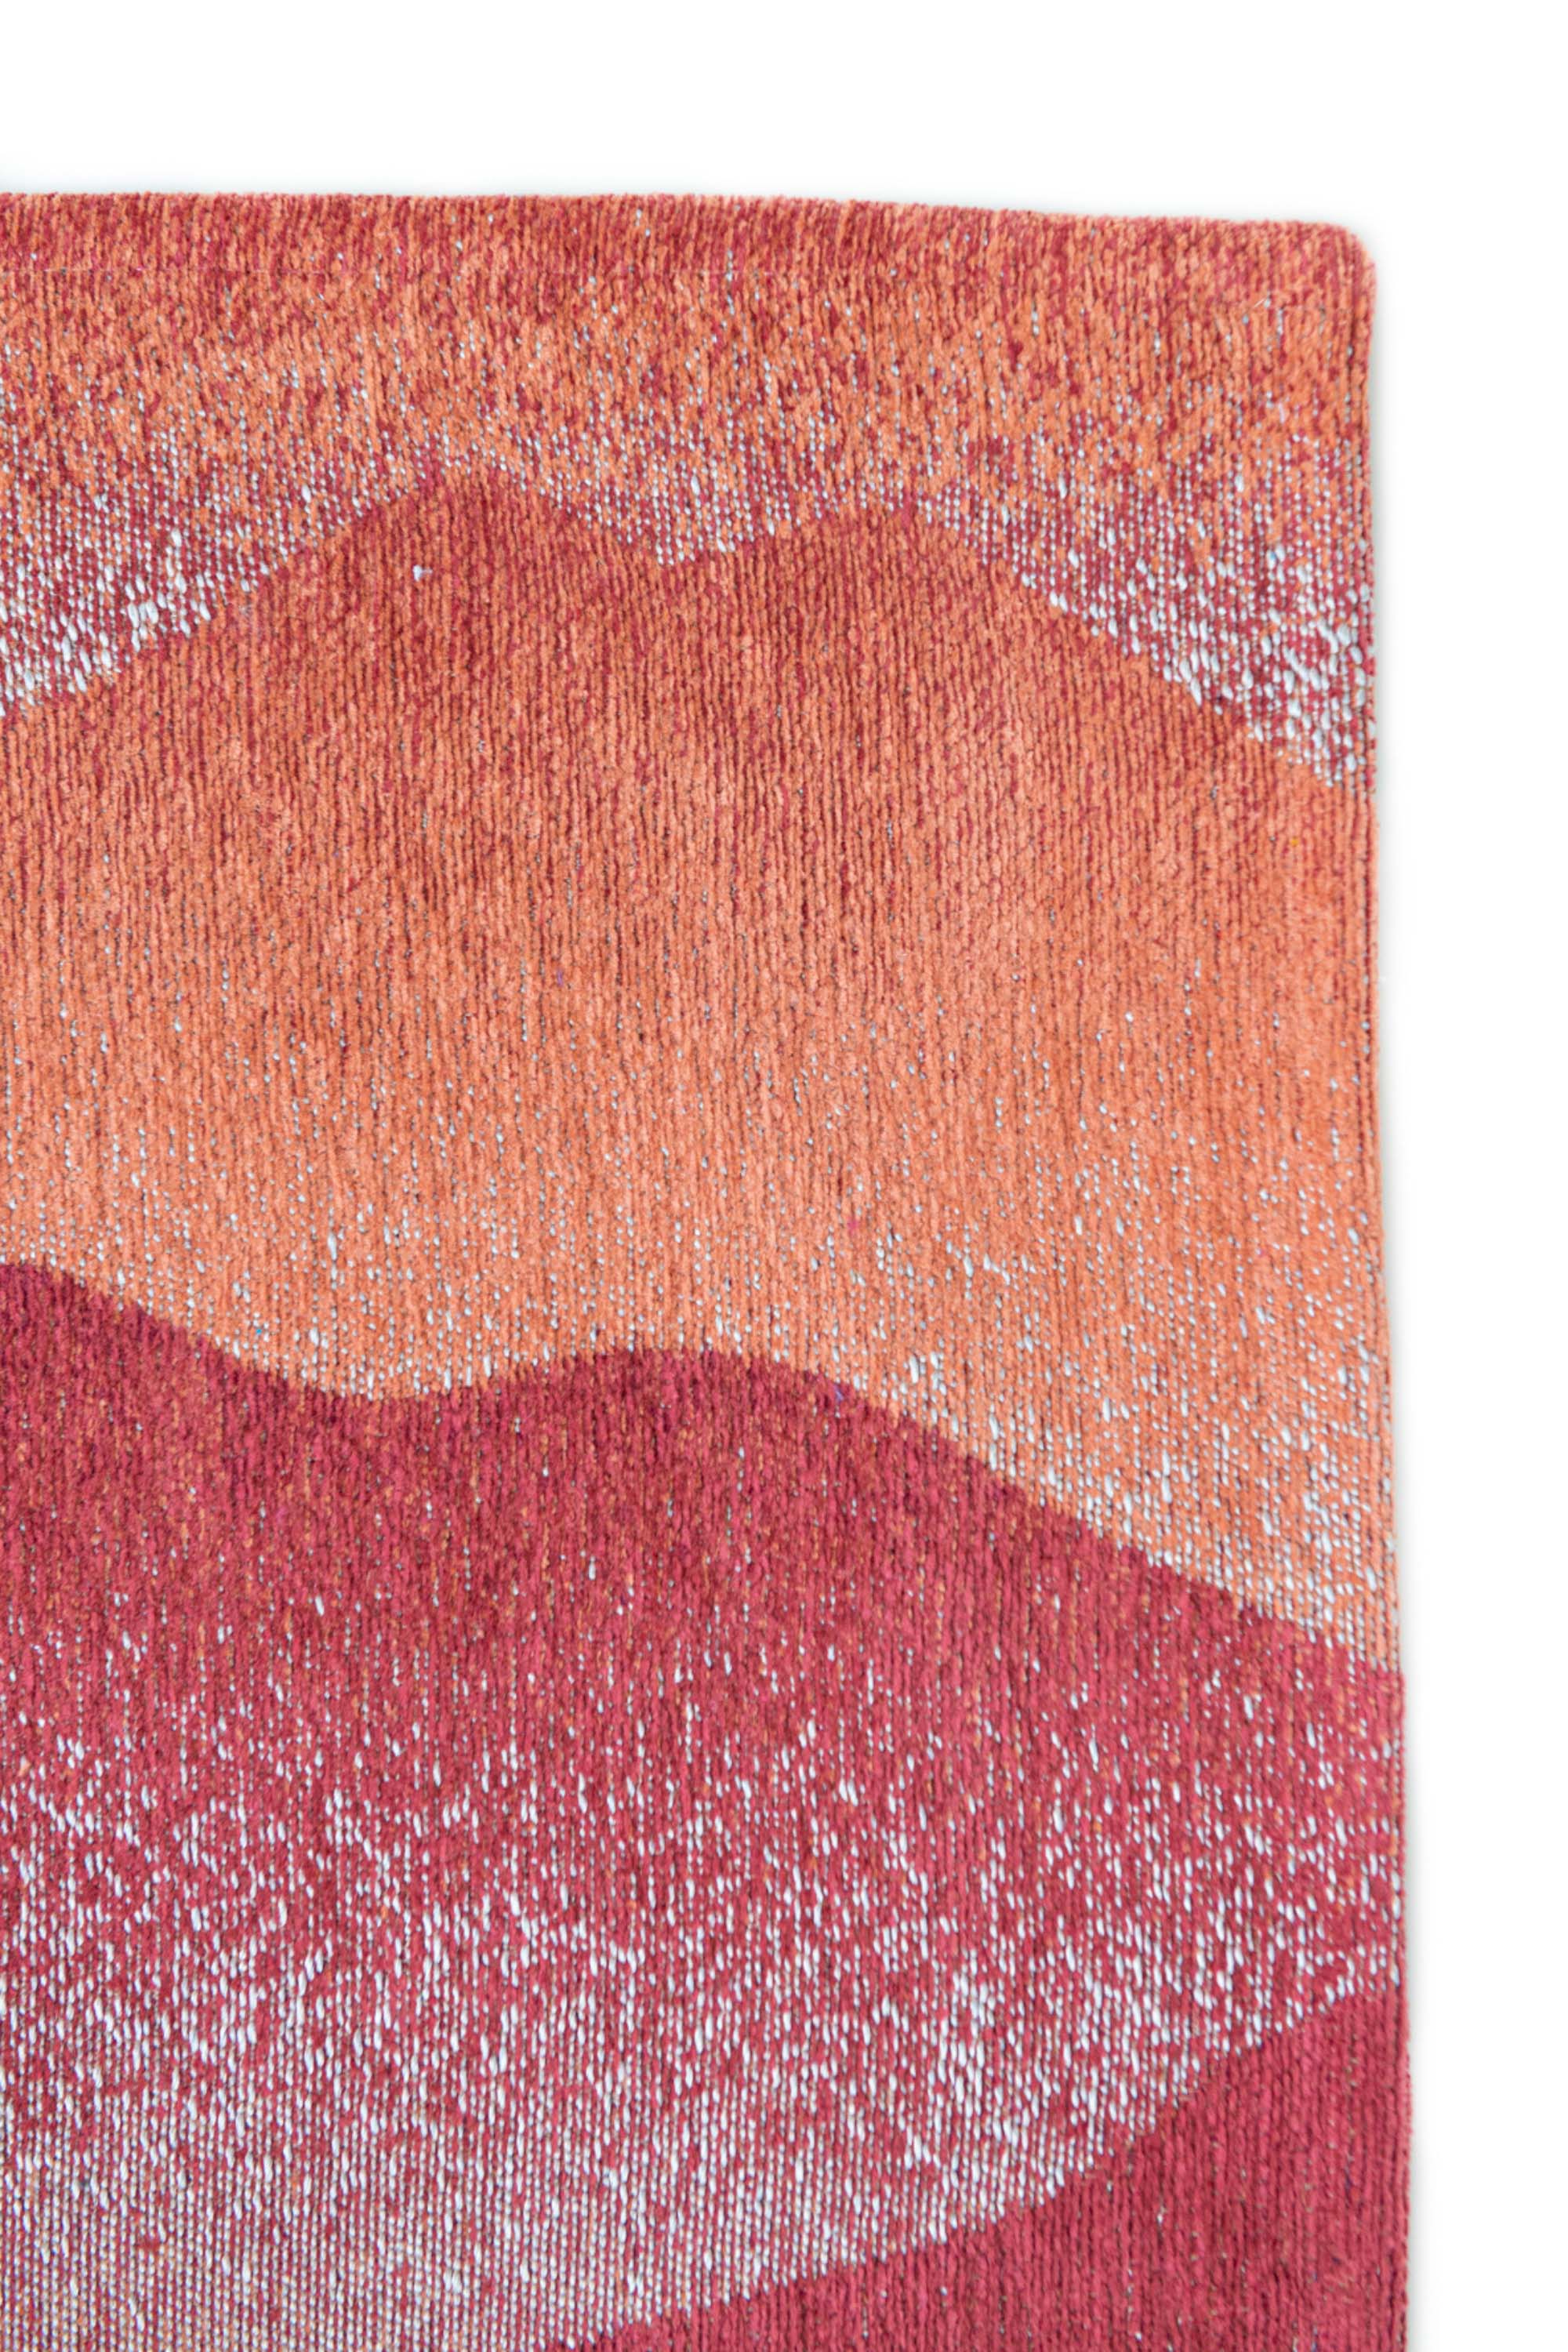 Modern rug with red abstract mountain range pattern